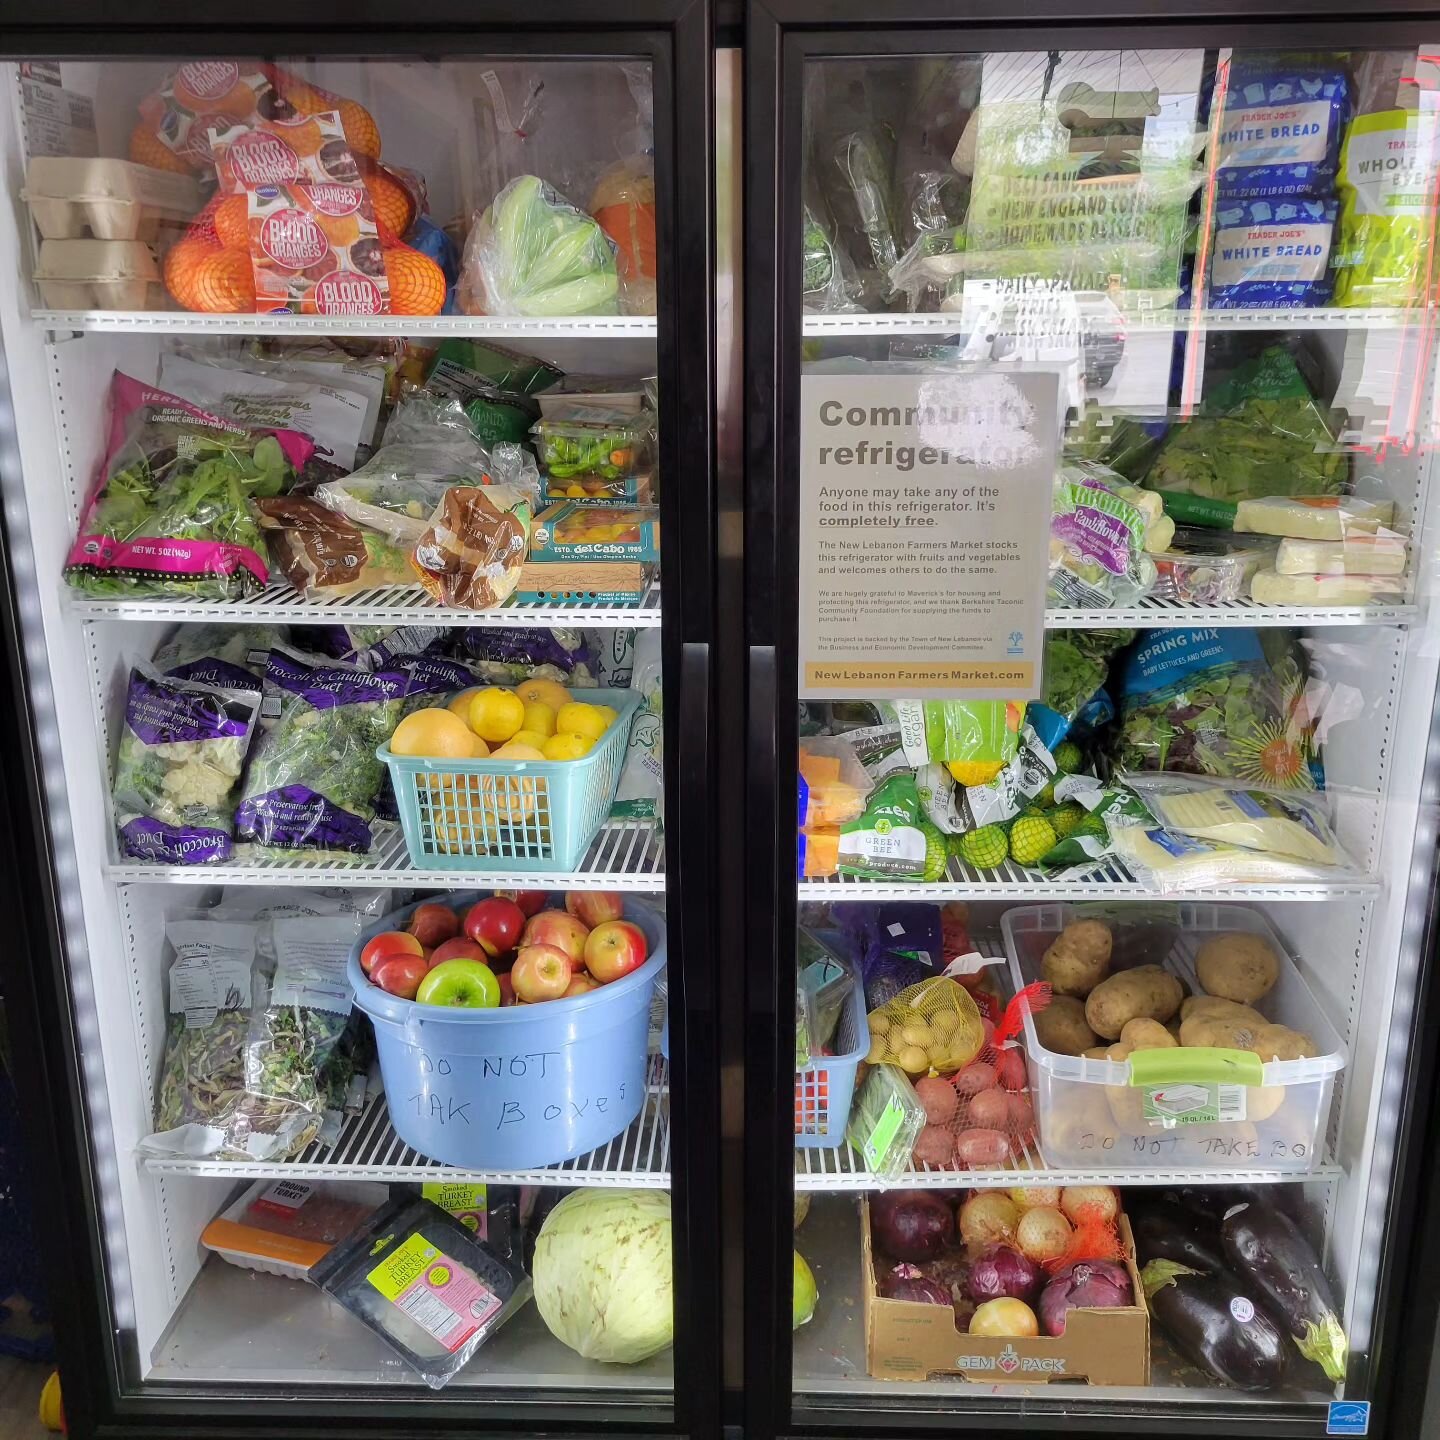 Community cooler is fully stocked and they have more food to add! Please come empty this cooler and give this food a home!

#NewLebanonNY #chathamny #canaanny #stephentown #stephentownny #hancockma #pittsfieldma #berkshirecountyma #rensselaercounty #